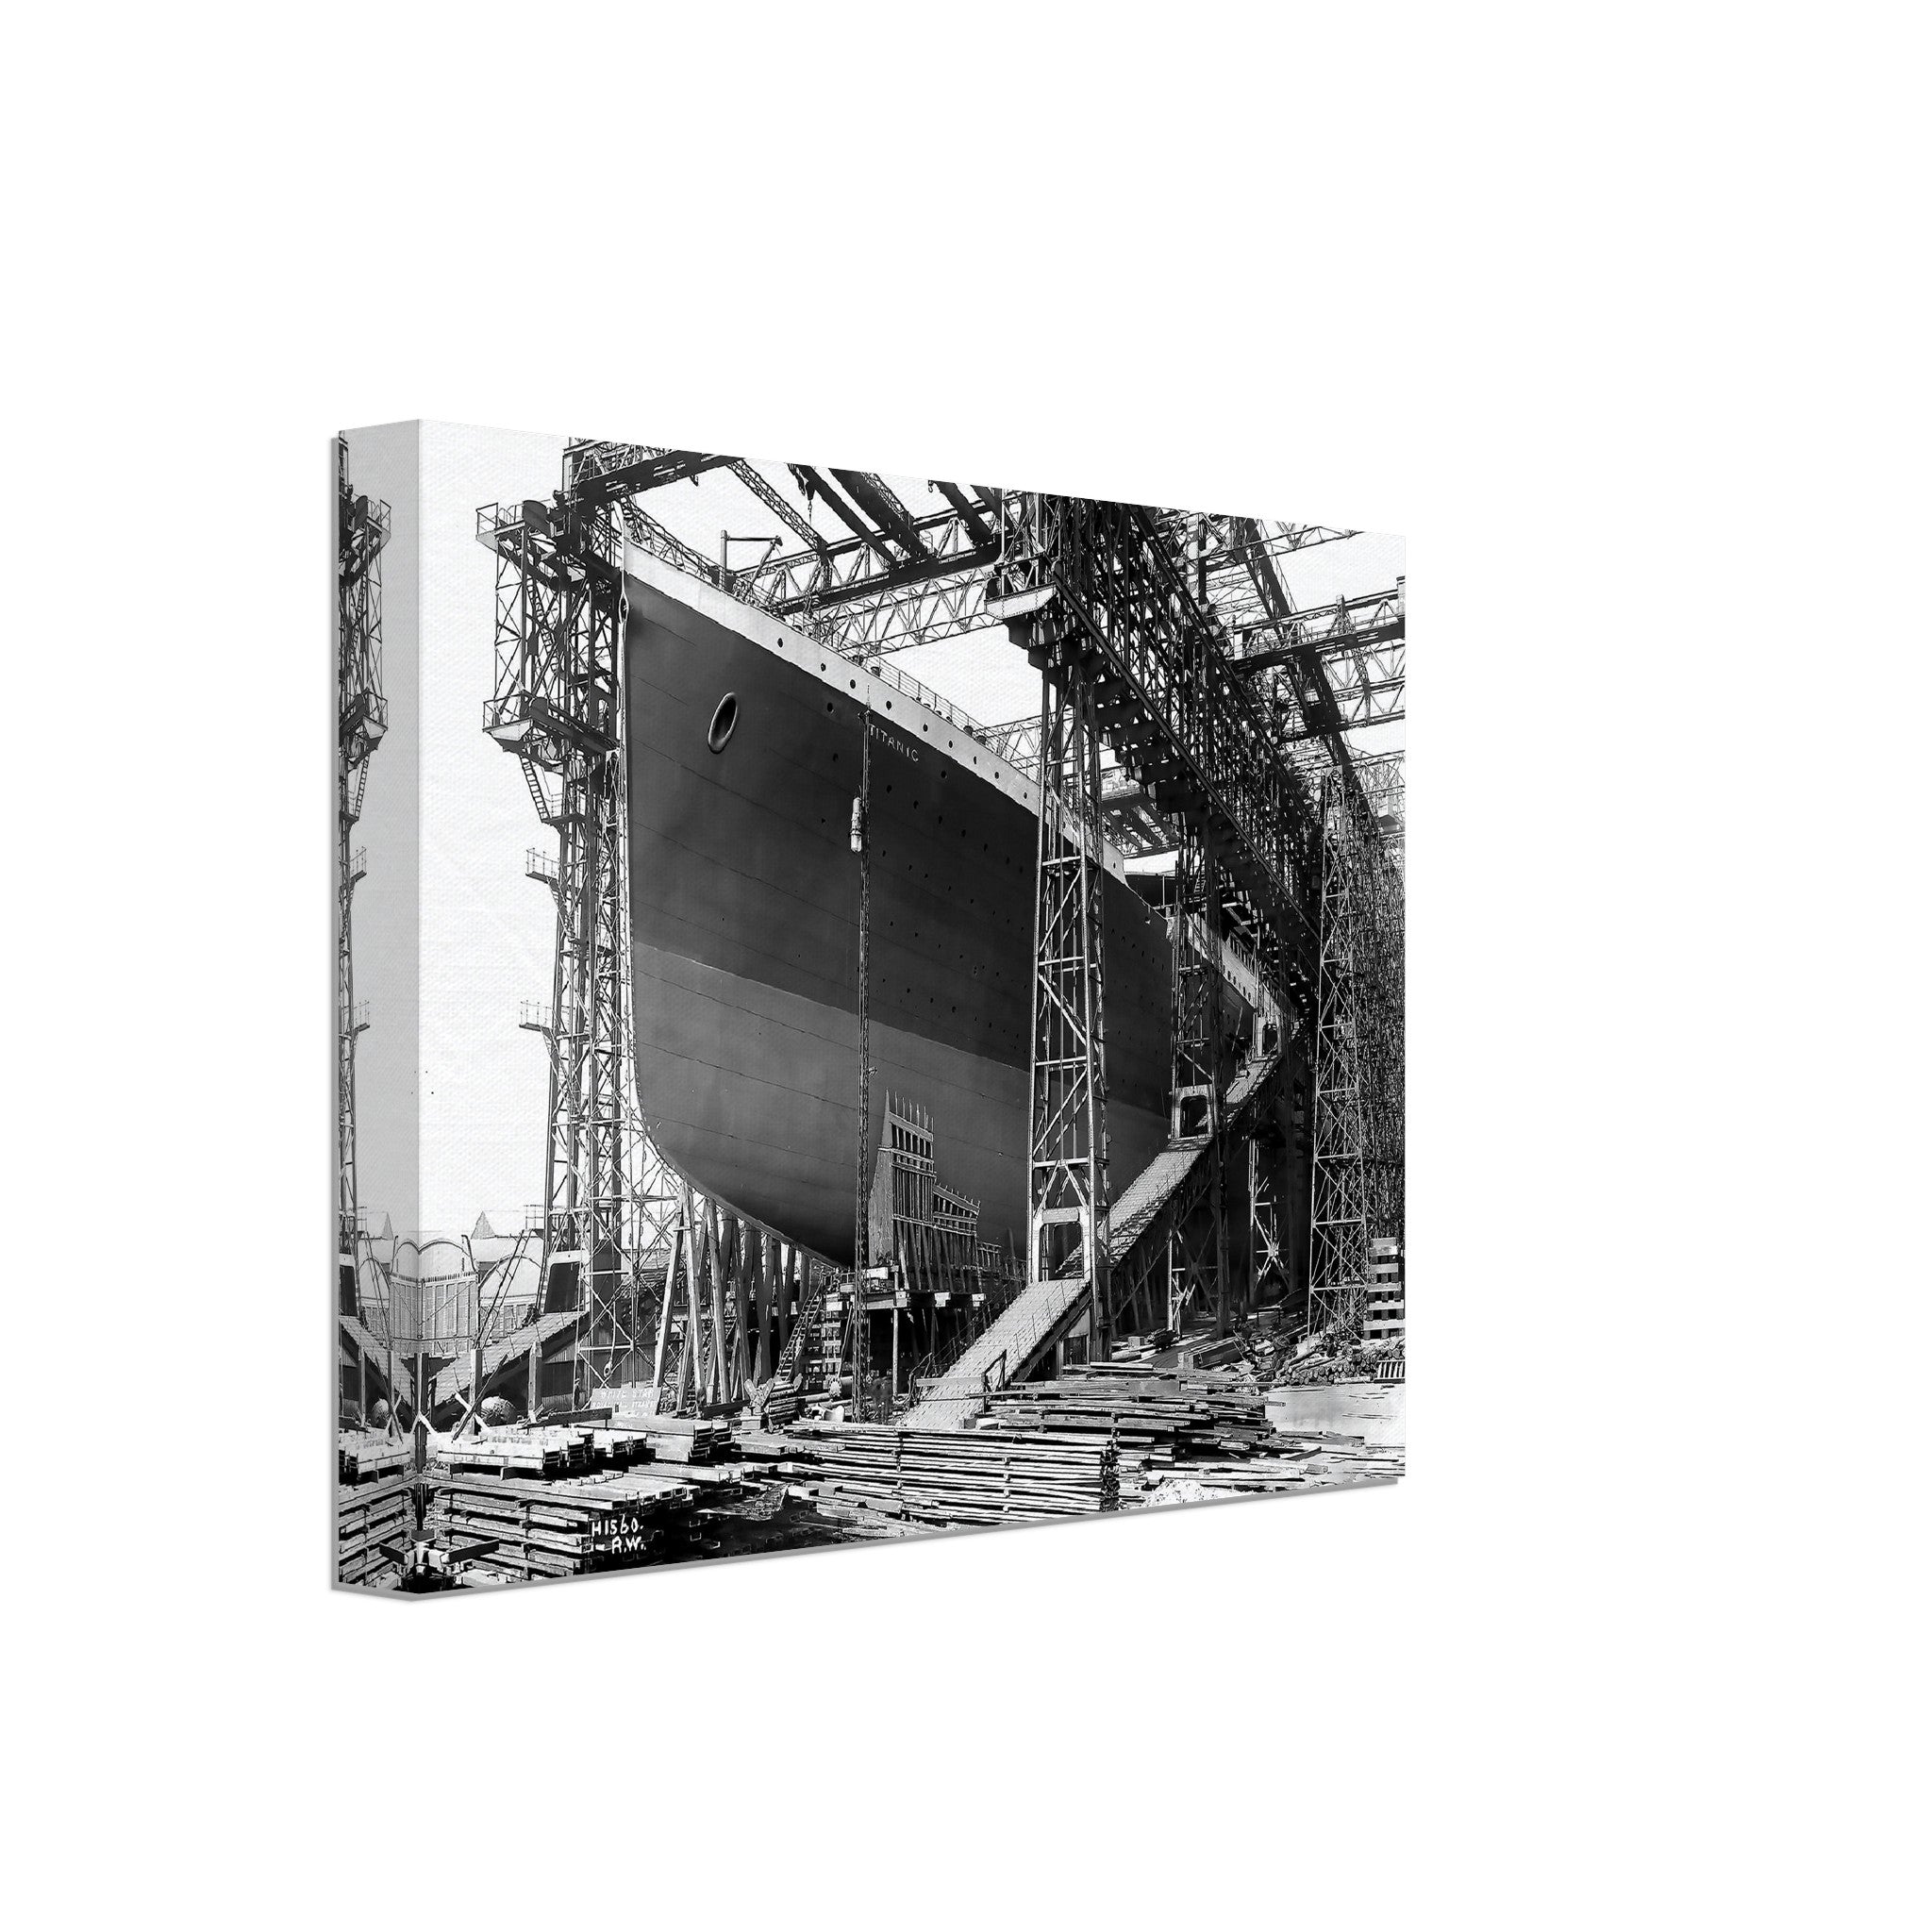 Titanic Canvas, Titanic Ready To Be Launched Photo Canvas Print From 1911, White Hart Line Belfast - WallArtPrints4U